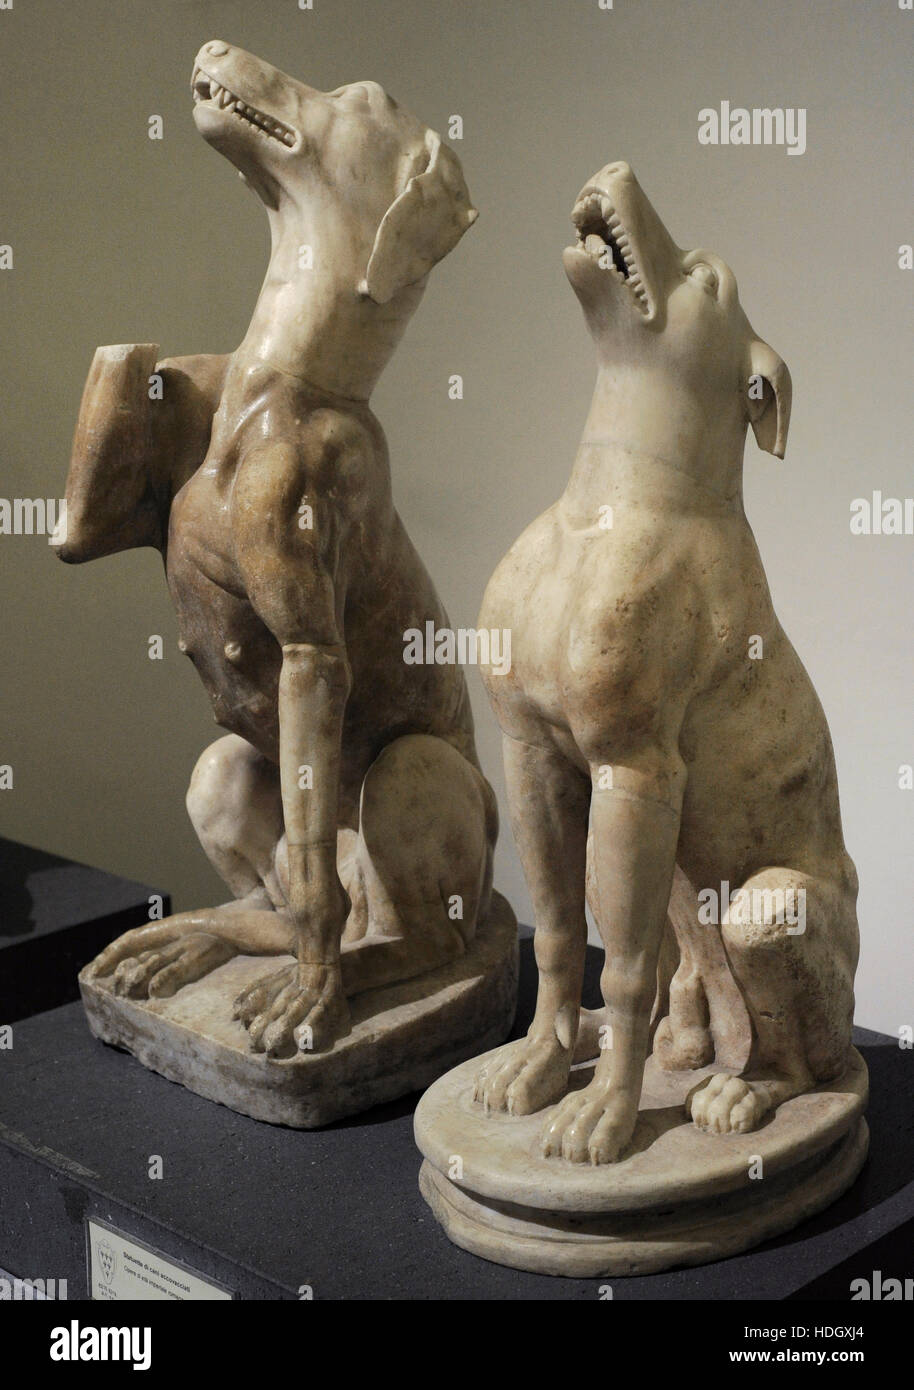 Roman art. Statues. Dogs crouching. Roman Imperial Age. National Archaeological Museum, Naples. Italy. Stock Photo